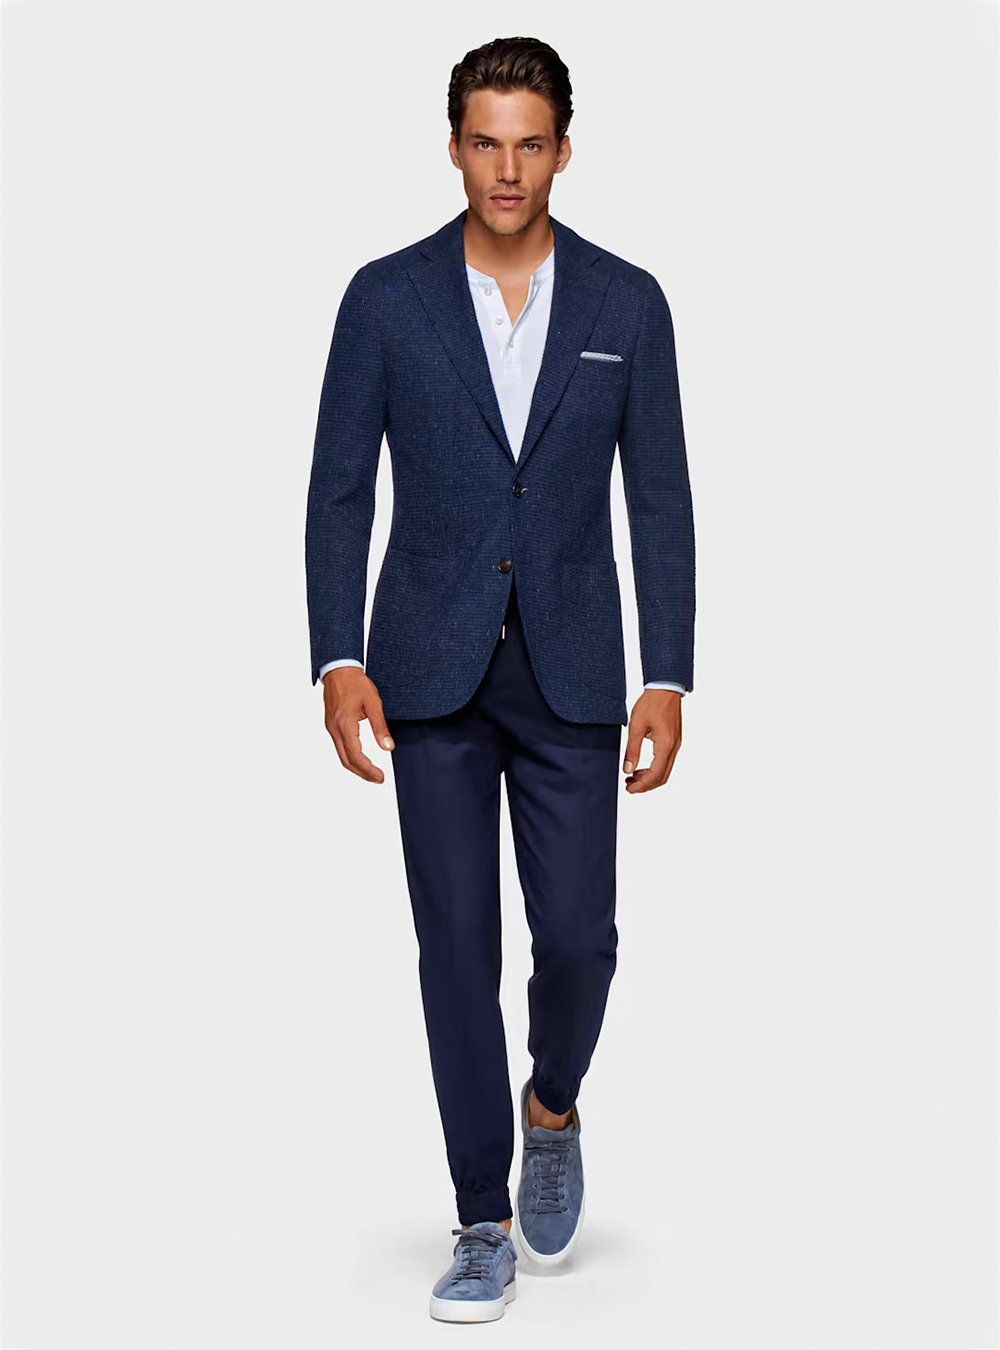 Navy suit, white henley t-shirt and blue sneakers